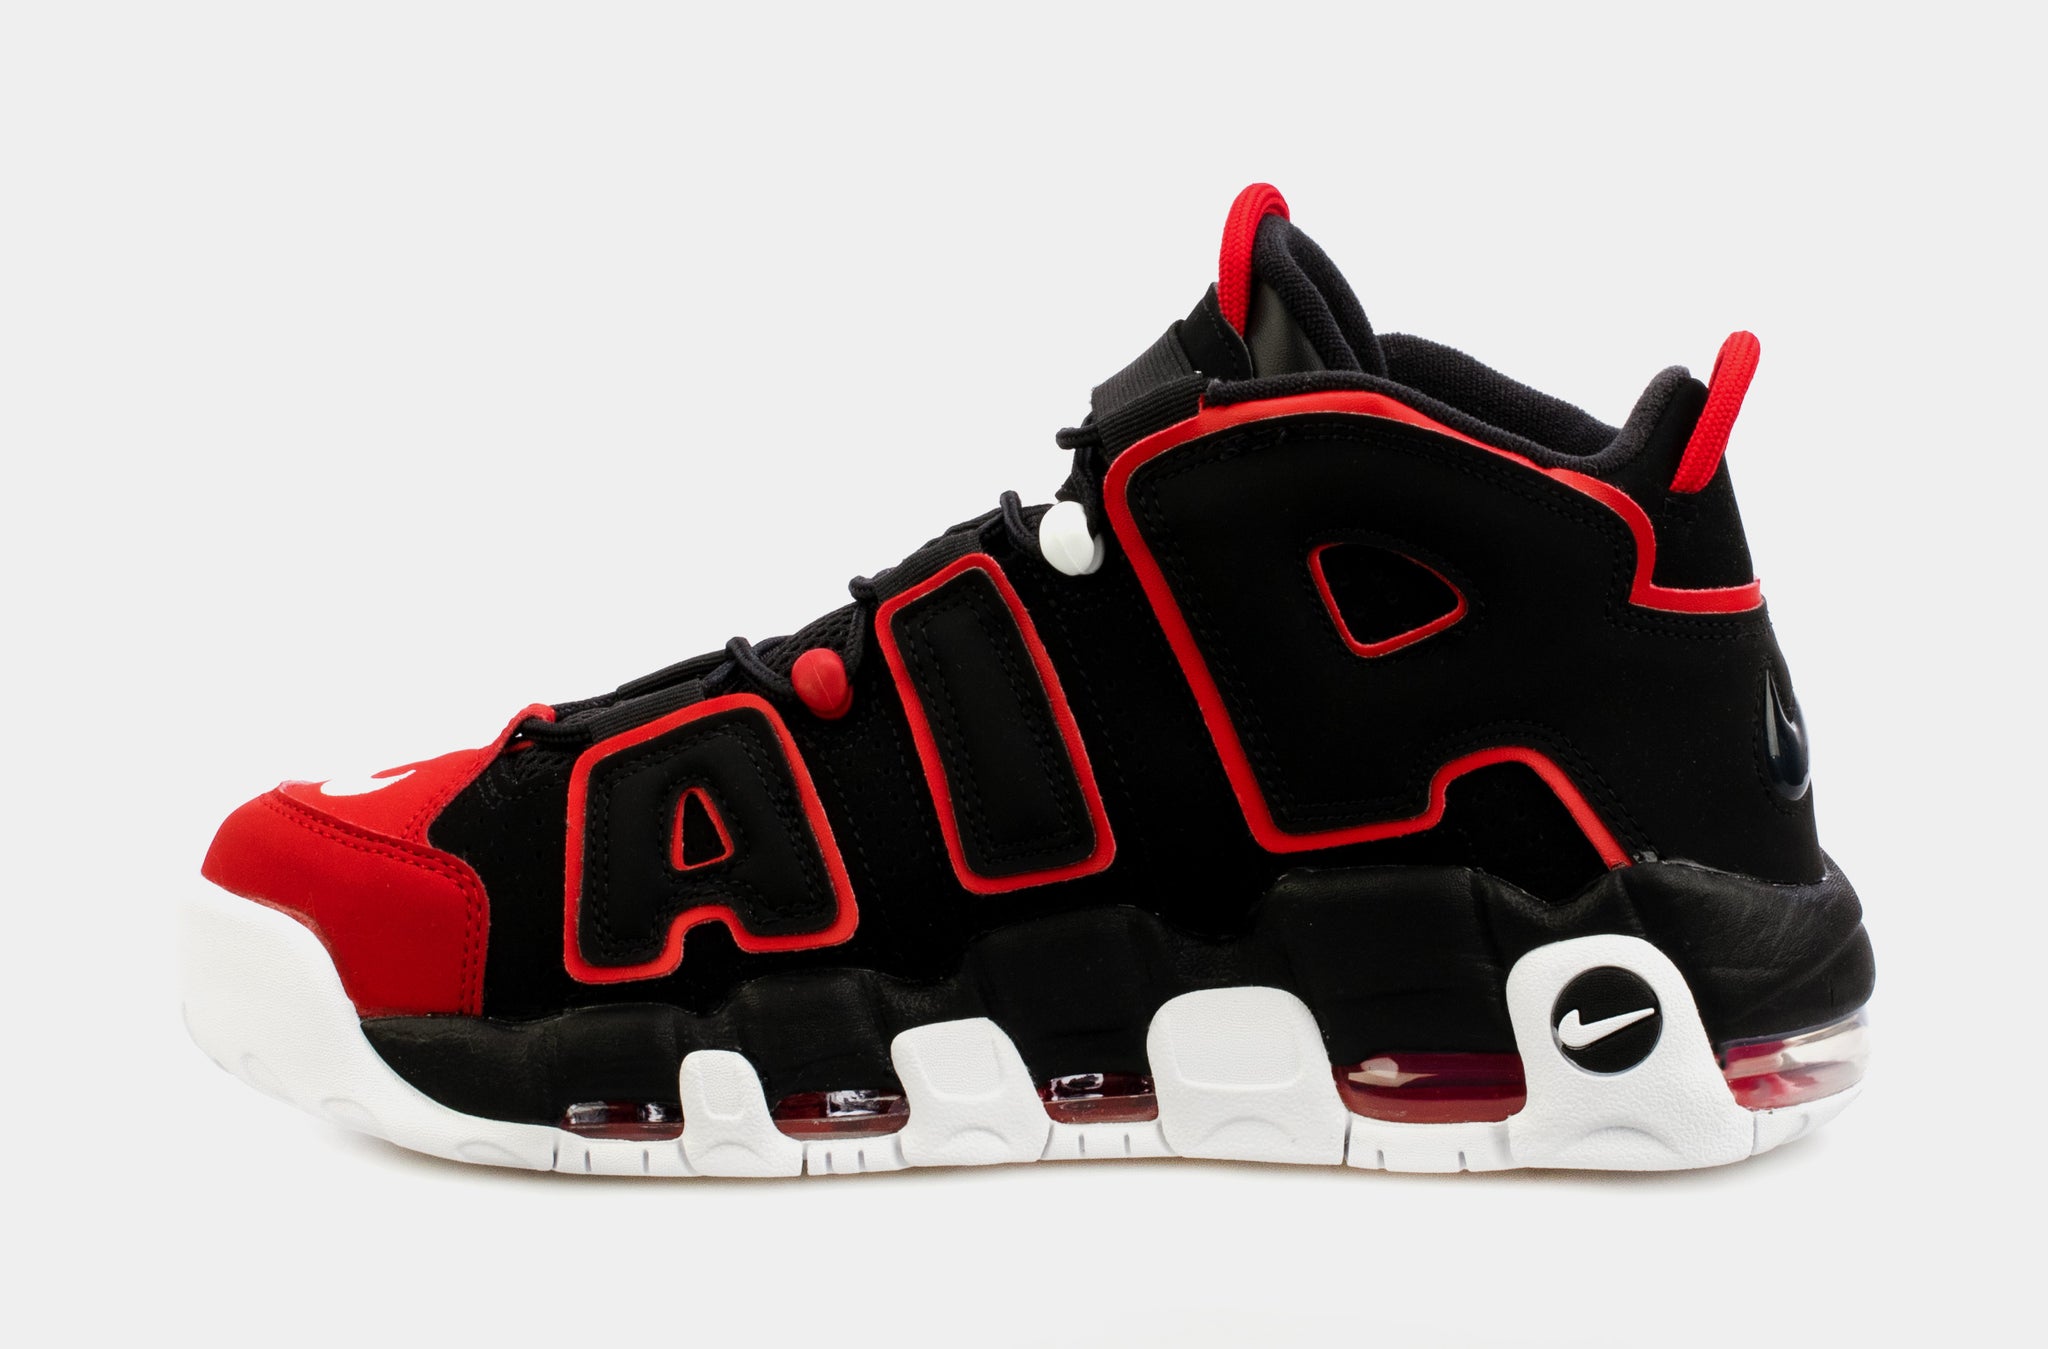 Nike Air More Uptempo Red Toe Mens Basketball Shoes Black Red